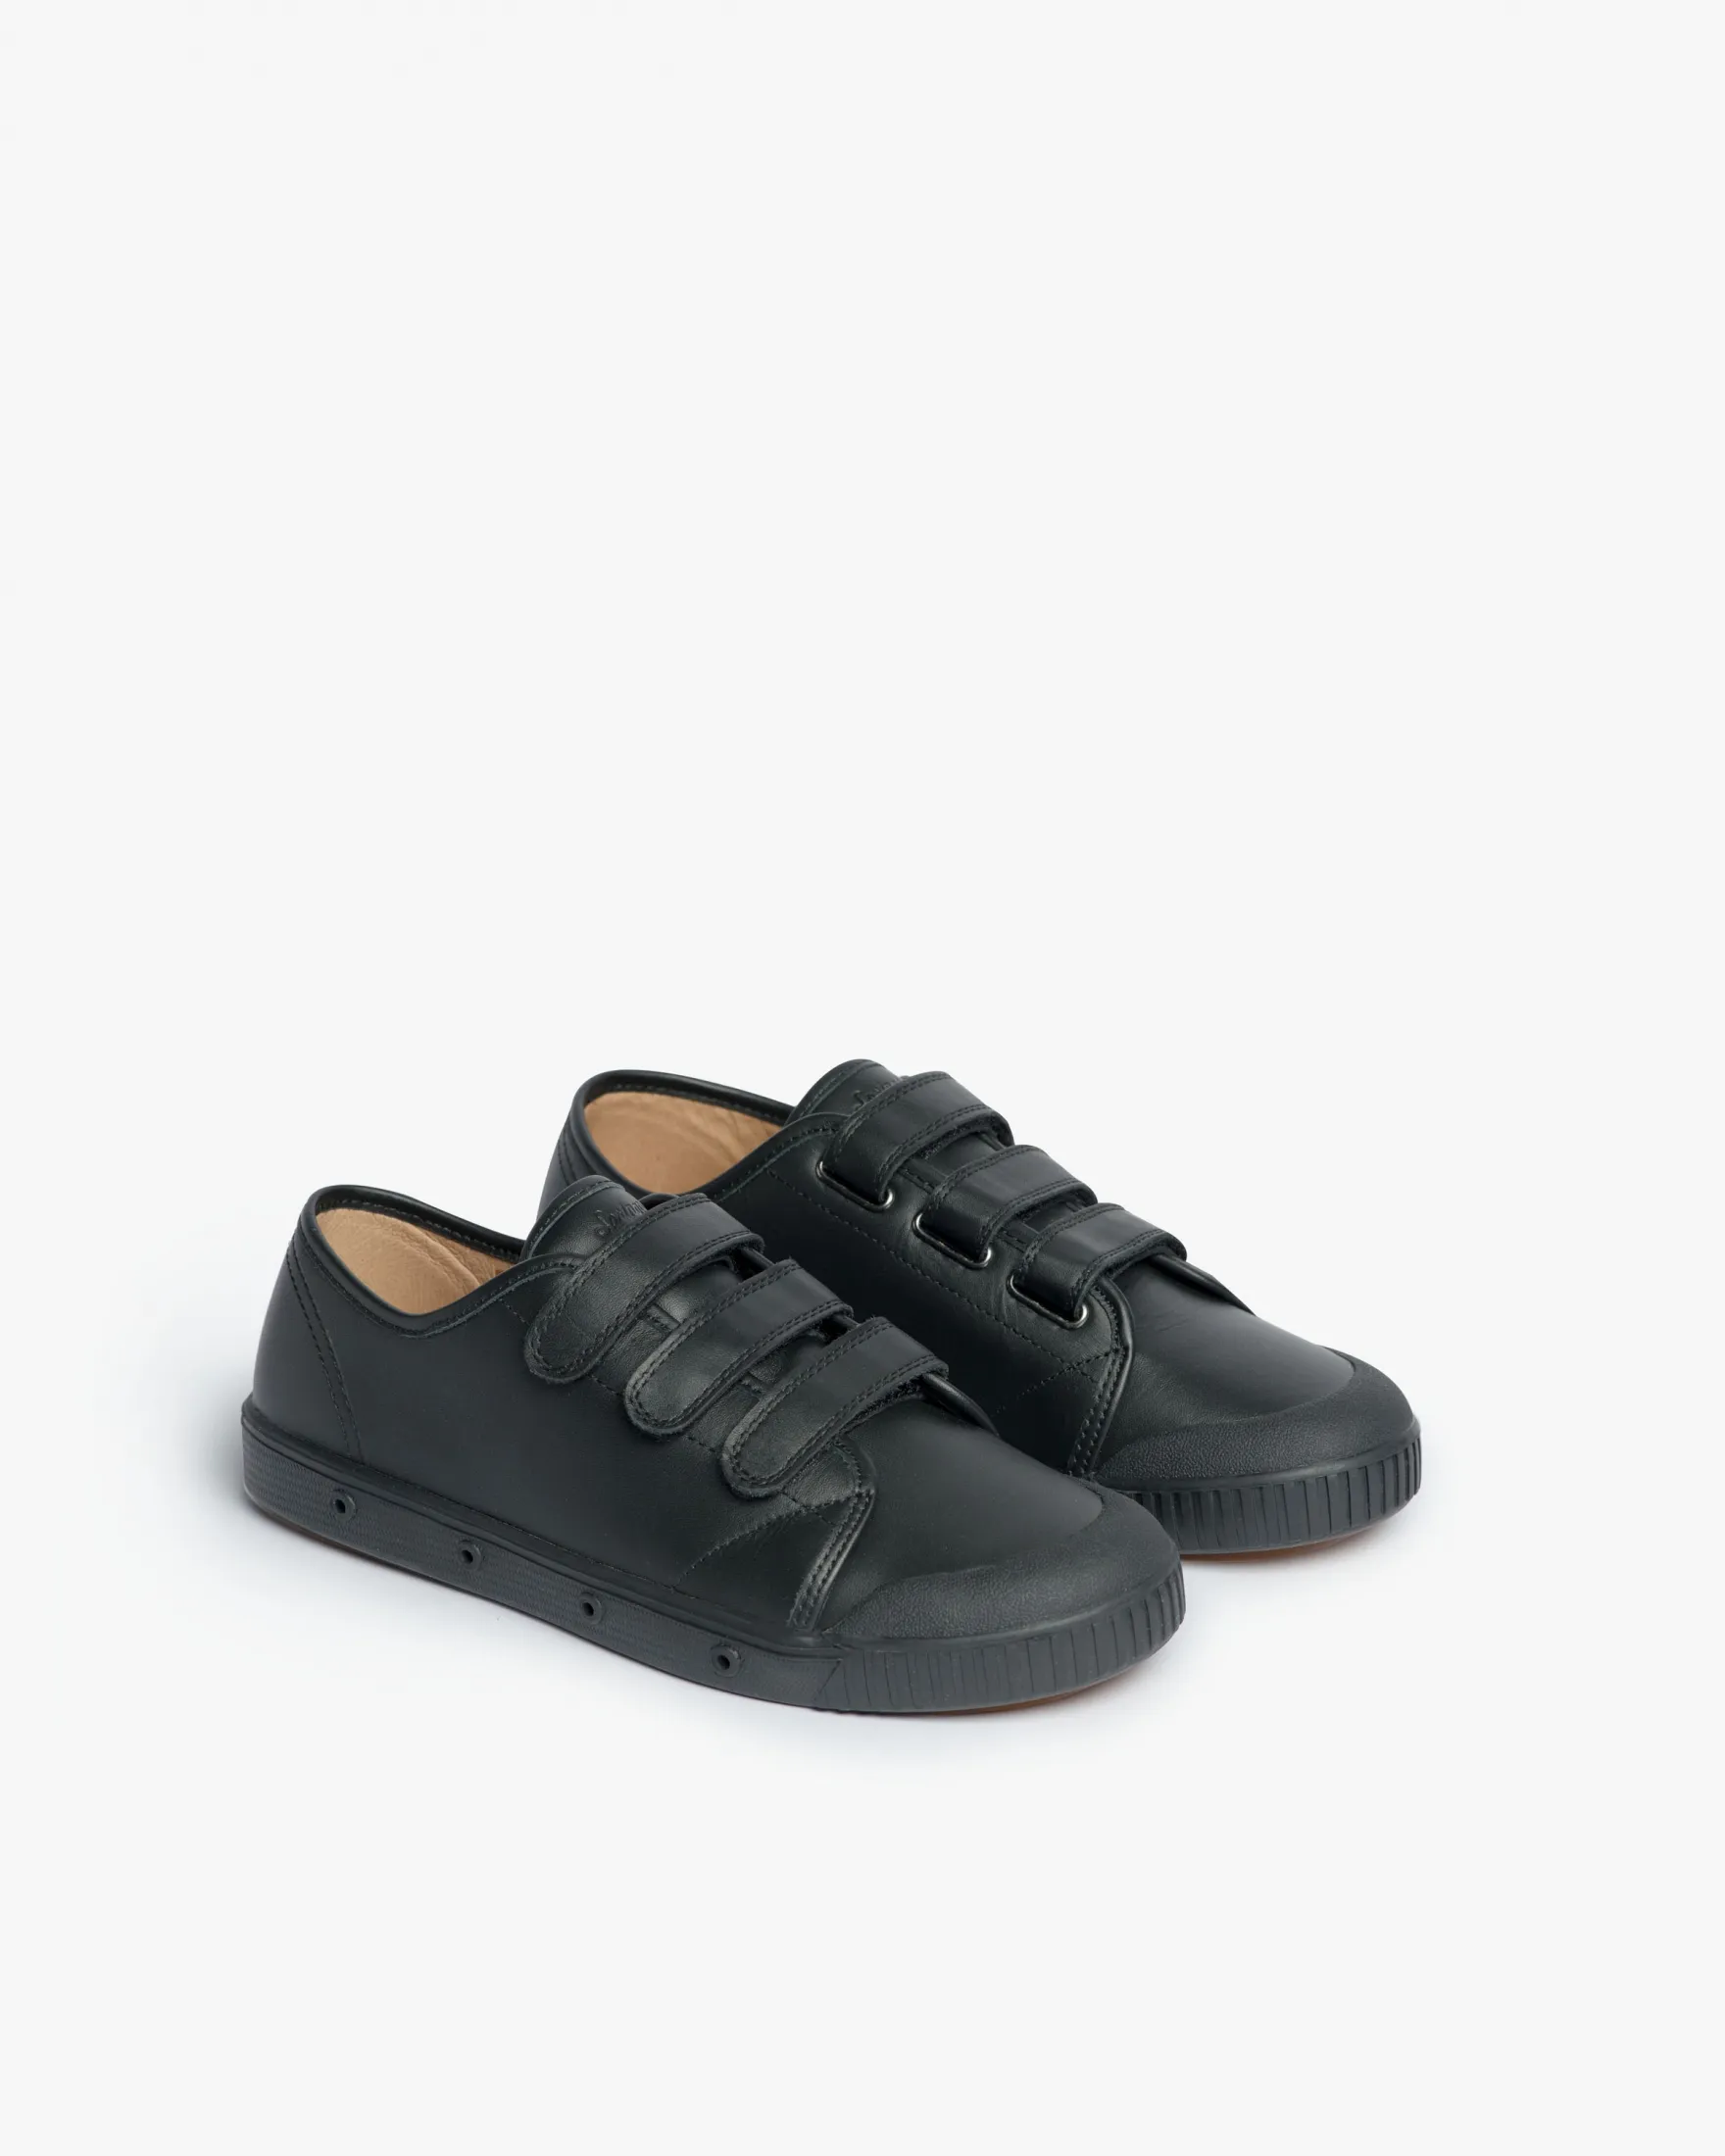 Black trainers in nappa leather